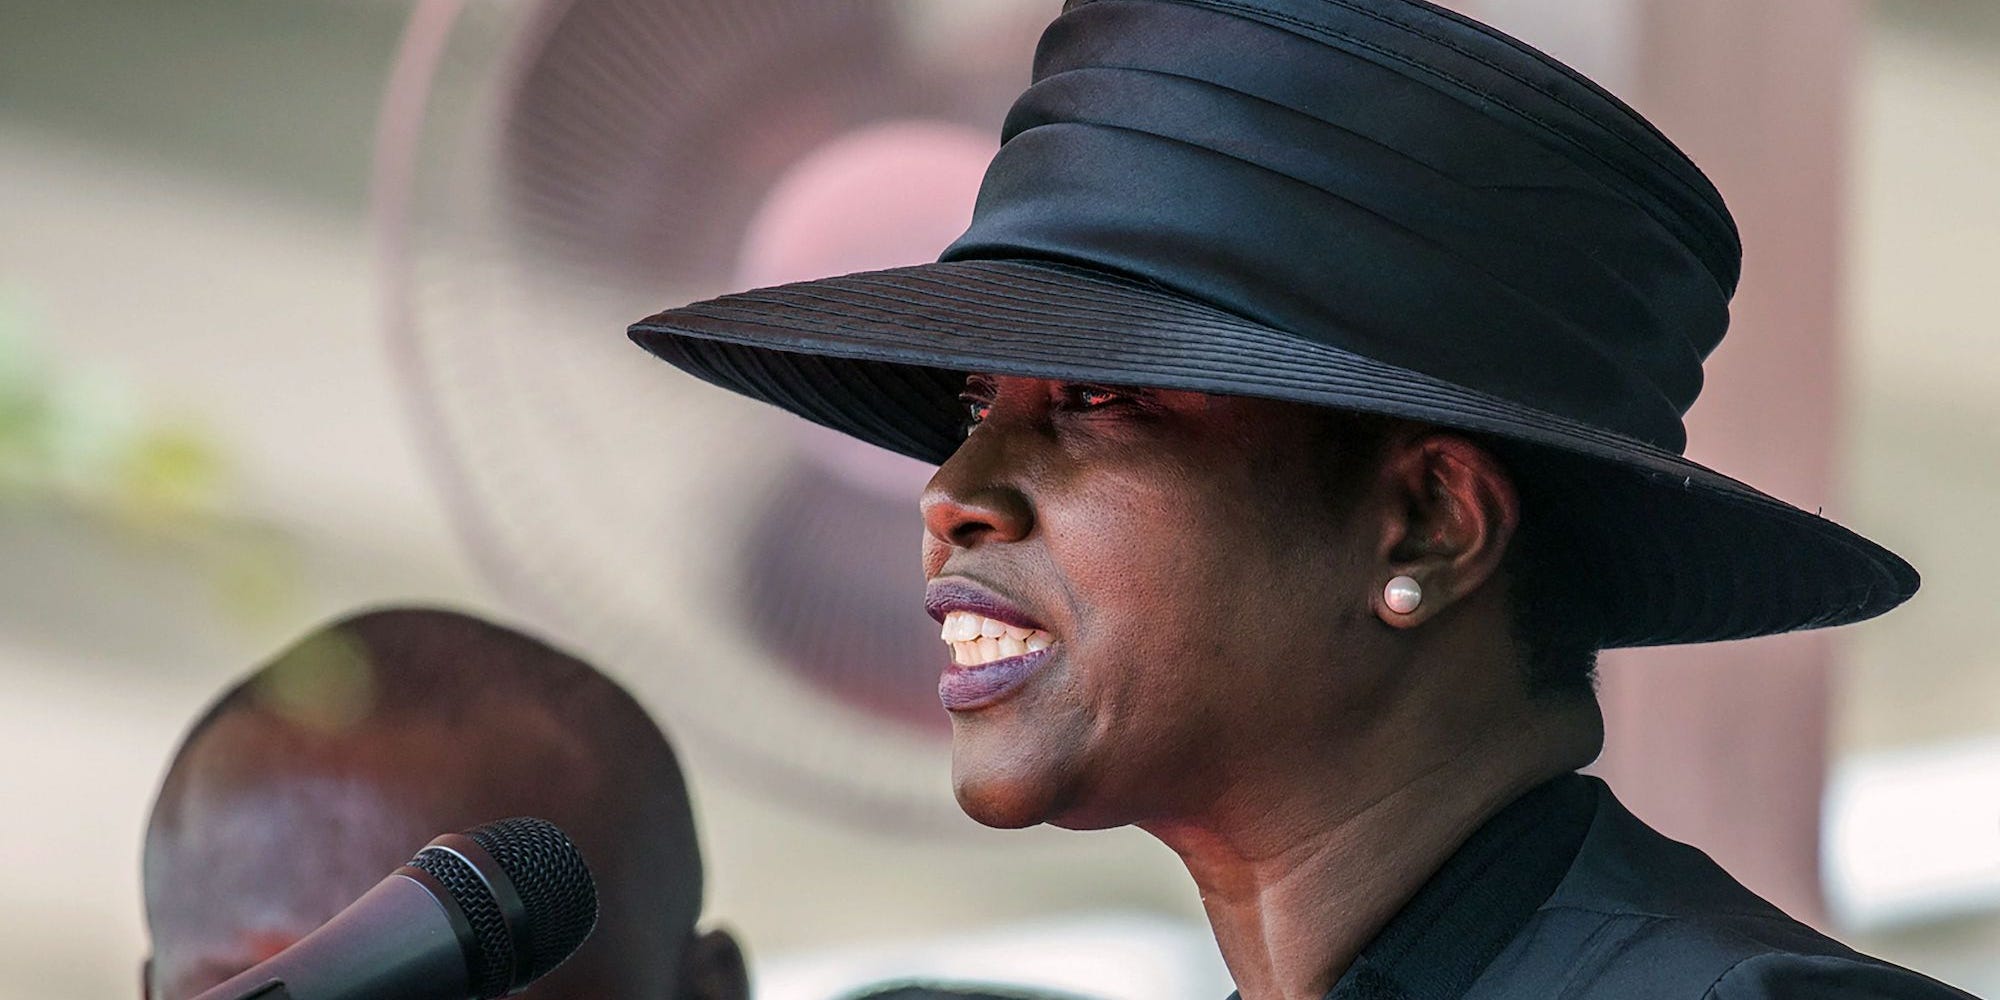 Martine Moïse, wearing a black hat, speaks at a microphone